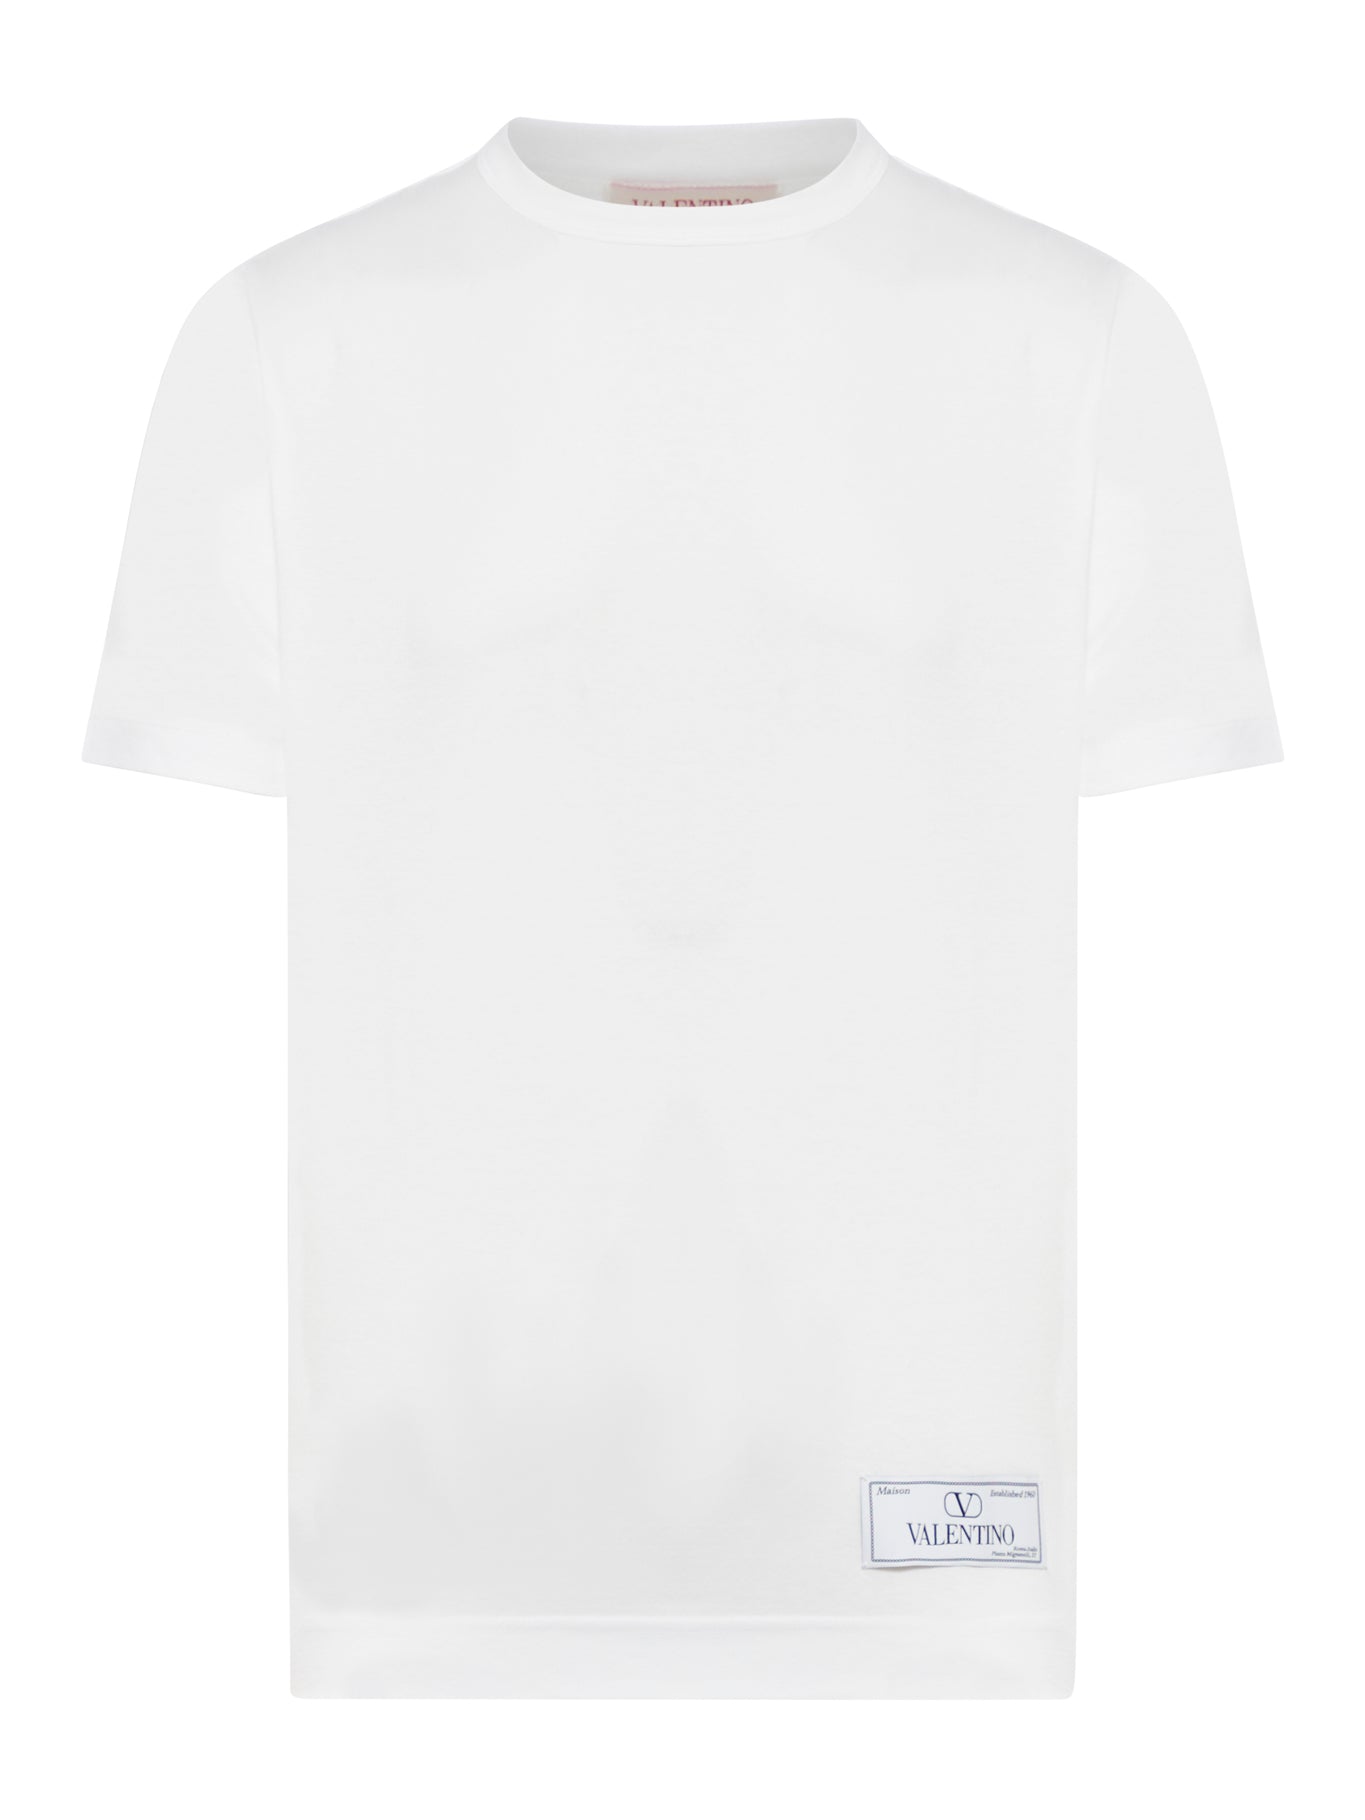 COTTON T-SHIRT WITH TAILORED MAISON VALENTINO LABEL